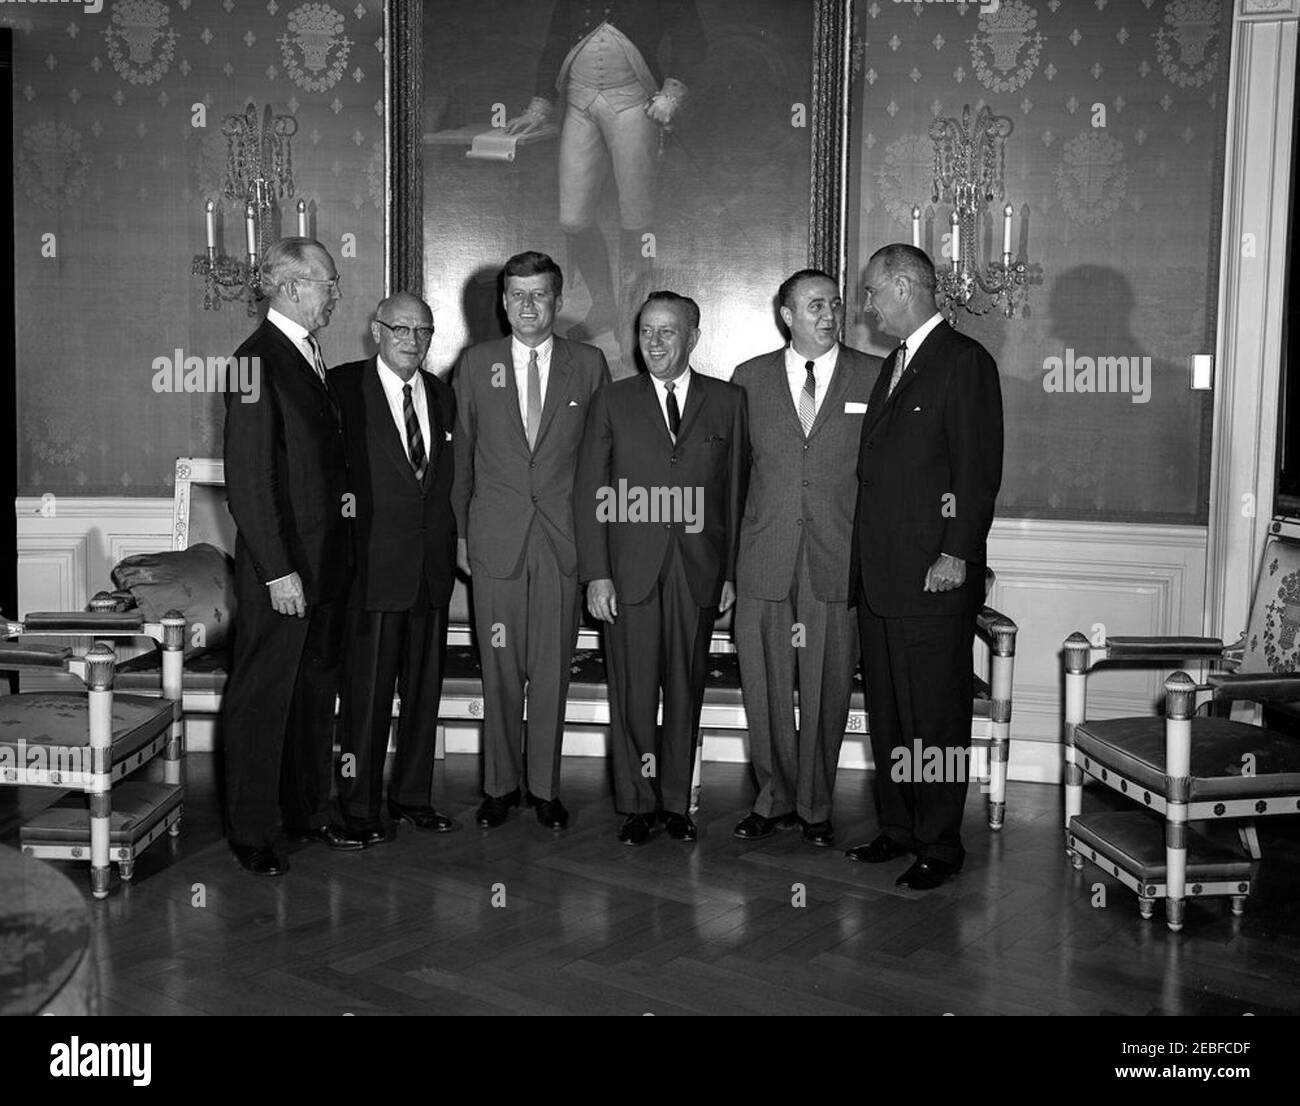 Congressional Coffee Hour (House), 6:00PM. President John F. Kennedy and Vice President Lyndon B. Johnson attend a Congressional Coffee Hour in the Blue Room, White House, Washington, D.C. (L-R): Unidentified; Representative Emanuel Celler of New York; President Kennedy; Representative Lester Holtzman of New York; Representative Alfred E. Santangelo of New York; Vice President Johnson. Stock Photo